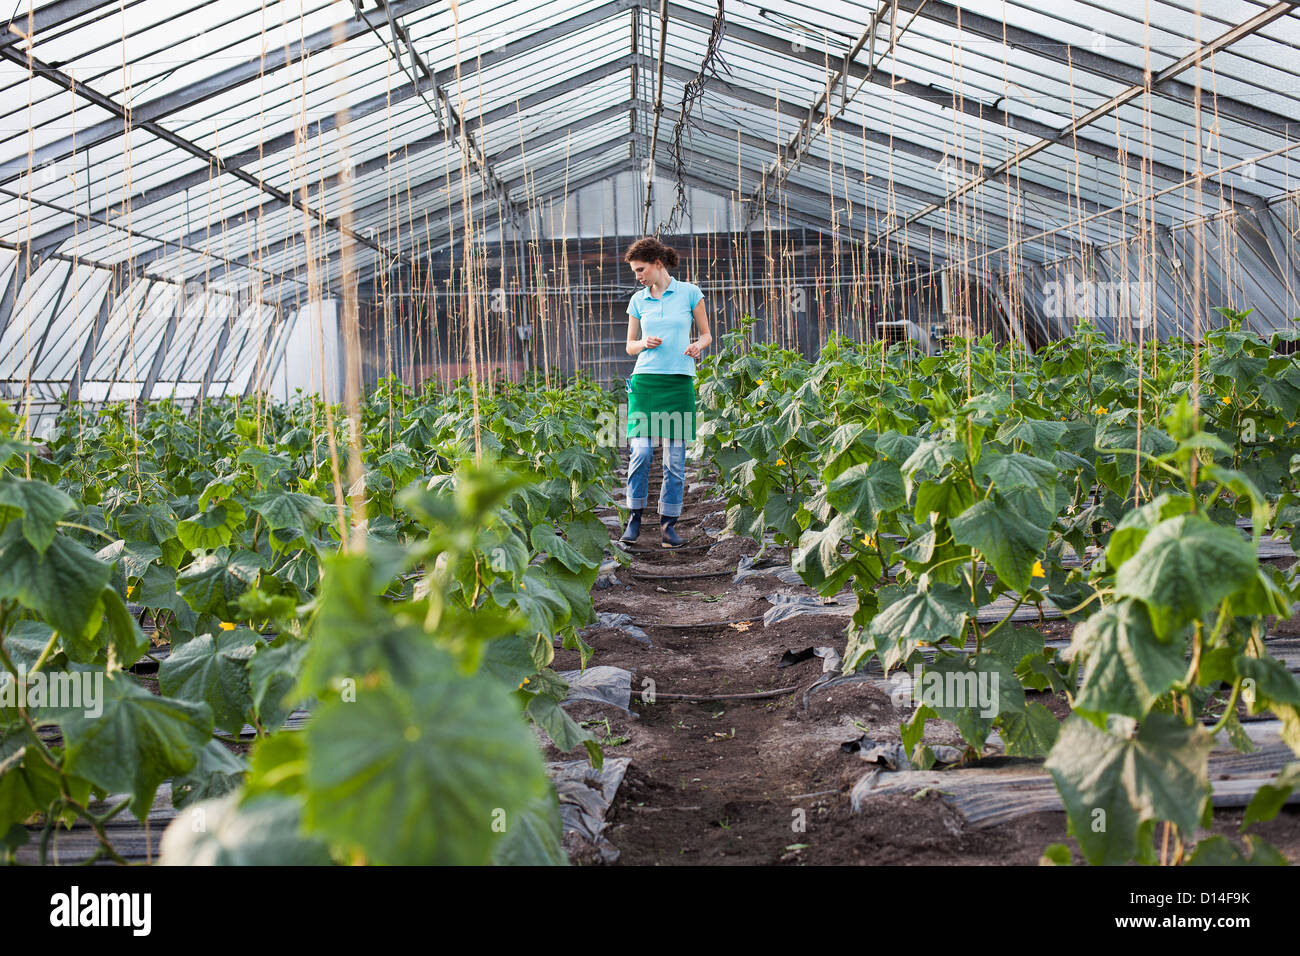 young woman working in greenhouse growing tomatoes Stock Photo